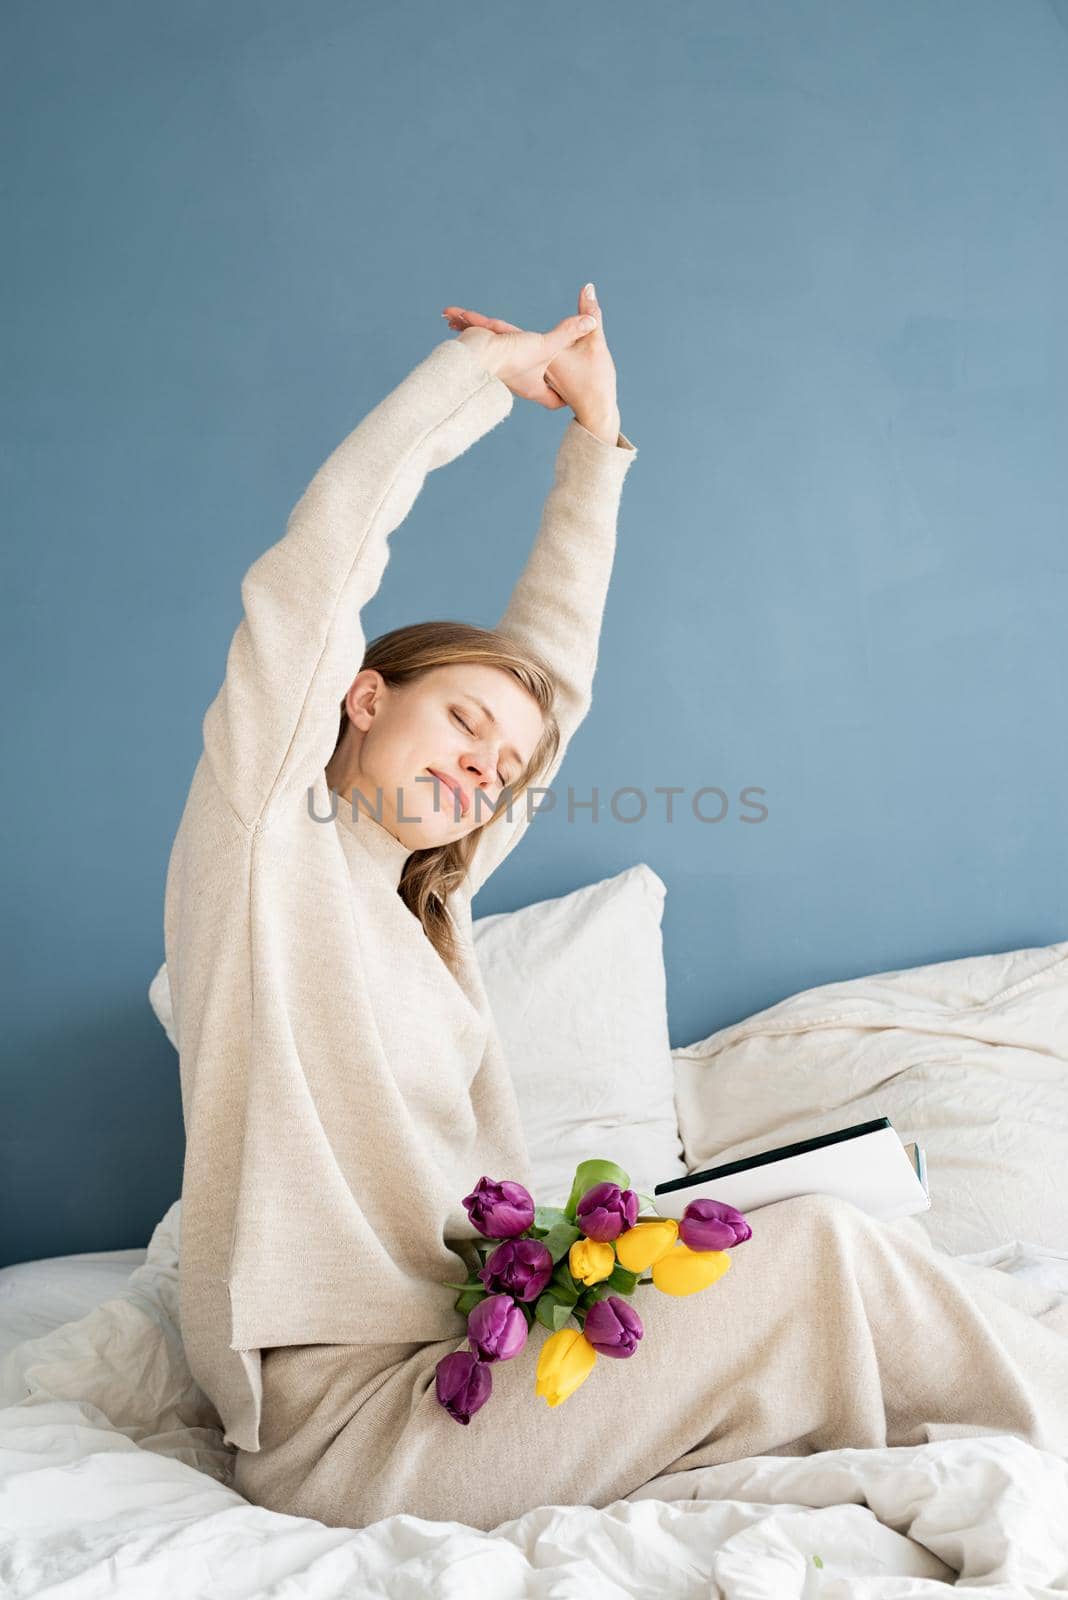 Happy woman sitting on the bed wearing pajamas stretching reading a book by Desperada